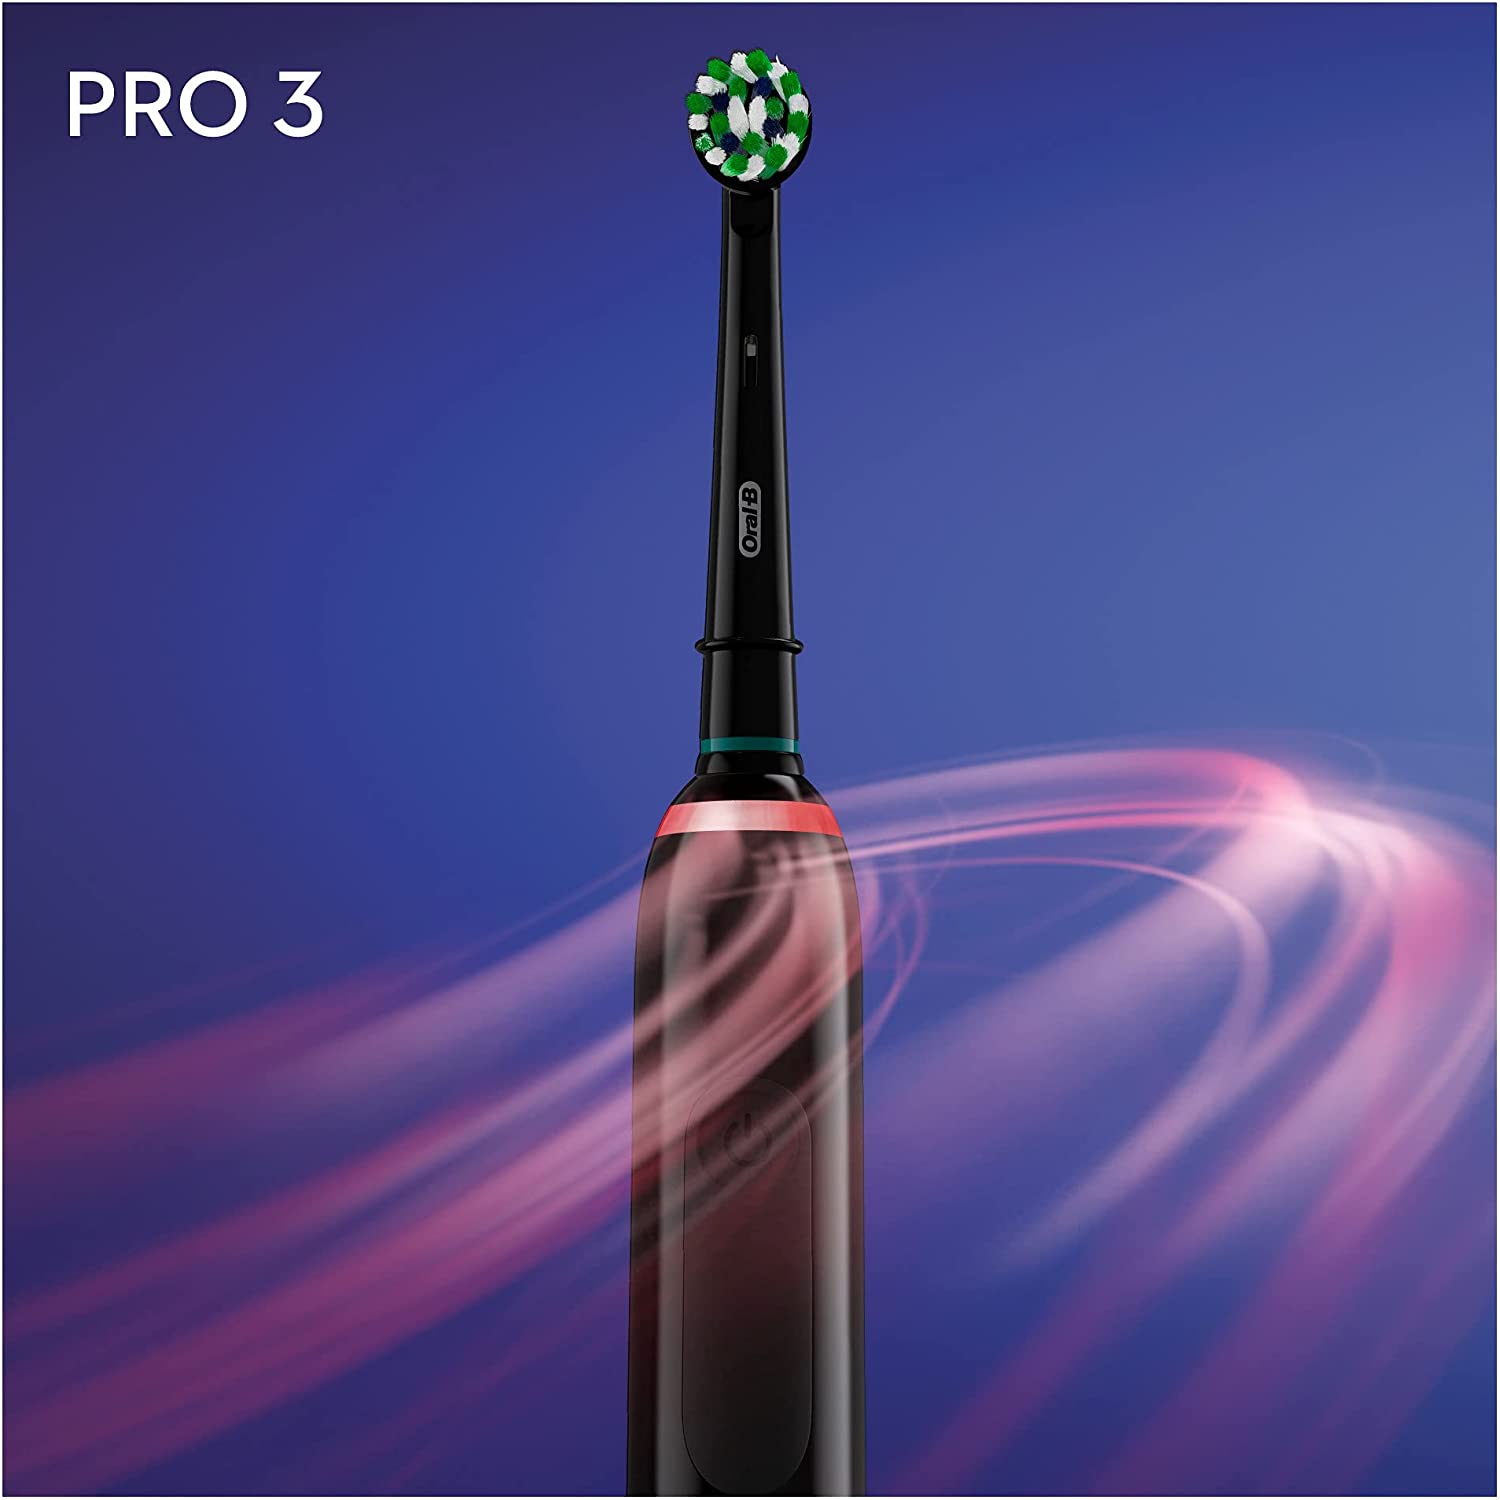 Oral-B Pro 3 - 3500 - Black Electric Toothbrush, 1 Handle with Visible Pressure Sensor, 1 Toothbrush Head, 1 Travel Case - Healthxpress.ie